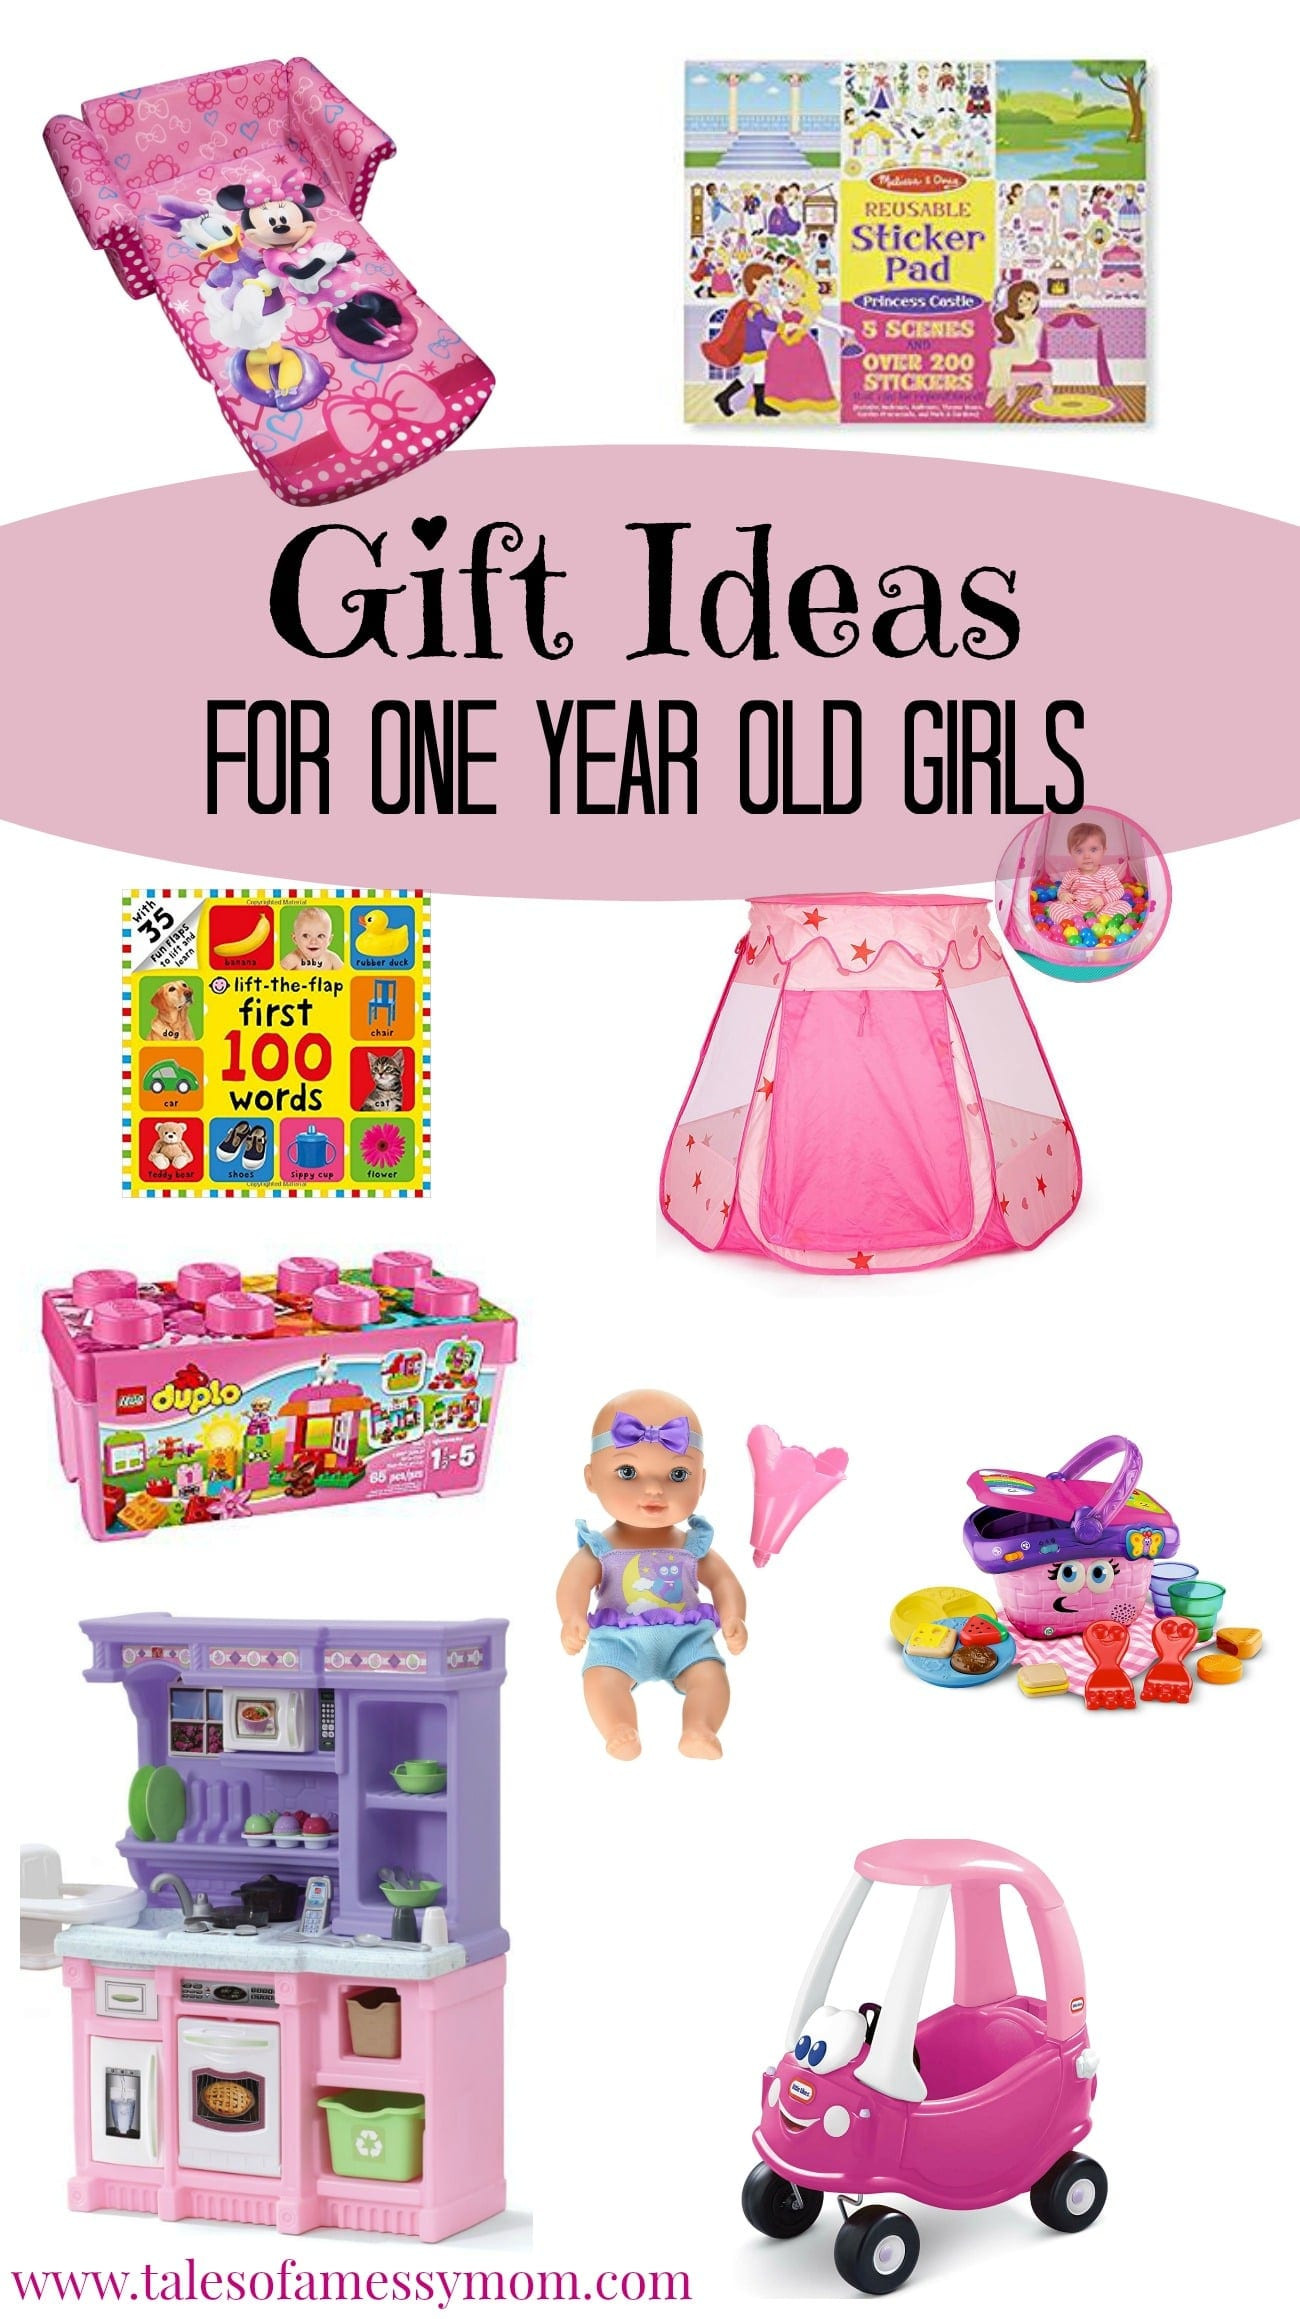 One Year Old Baby Girl Gift Ideas
 Gift Ideas for e Year Old Girls Tales of a Messy Mom